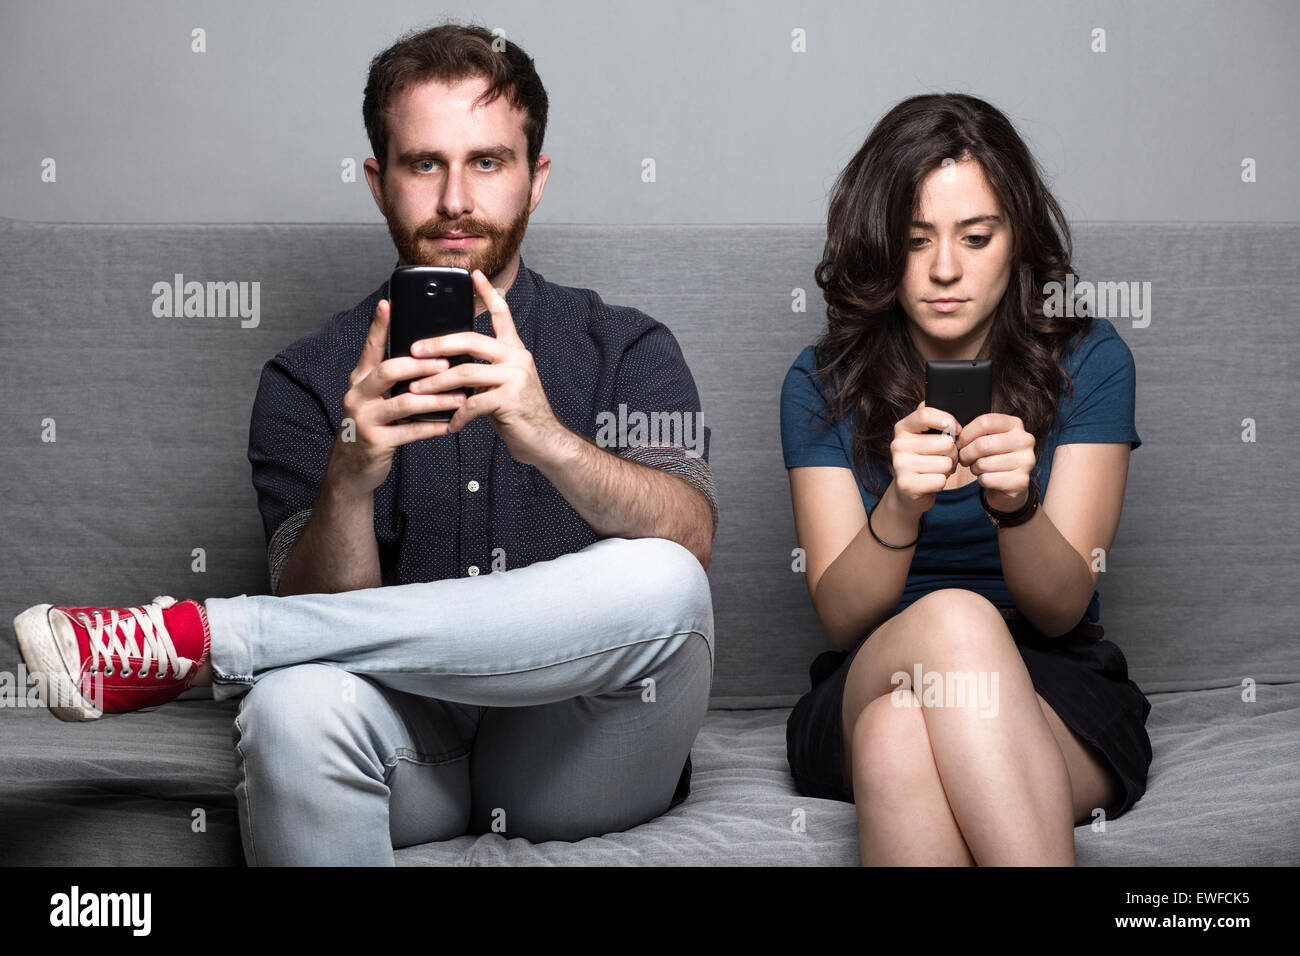 Young Silent Couple with Smartphones Sitting on a Couch Stock Photo